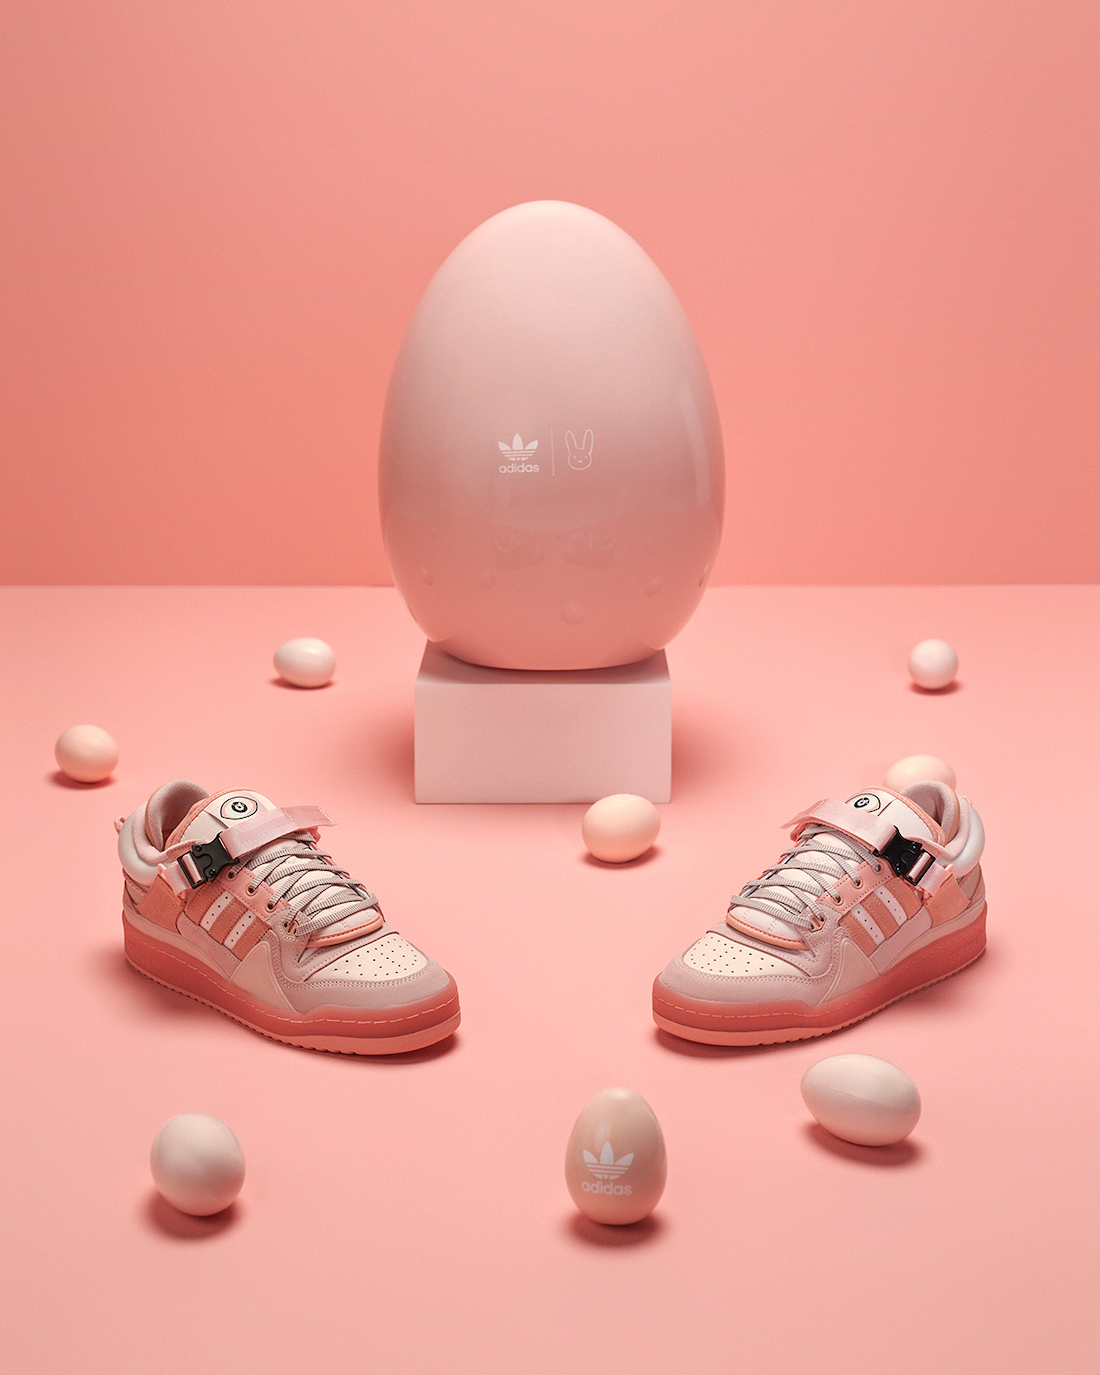 Bad Bunny adidas Forum Buckle Low Easter Egg GW0265 Release Date 1